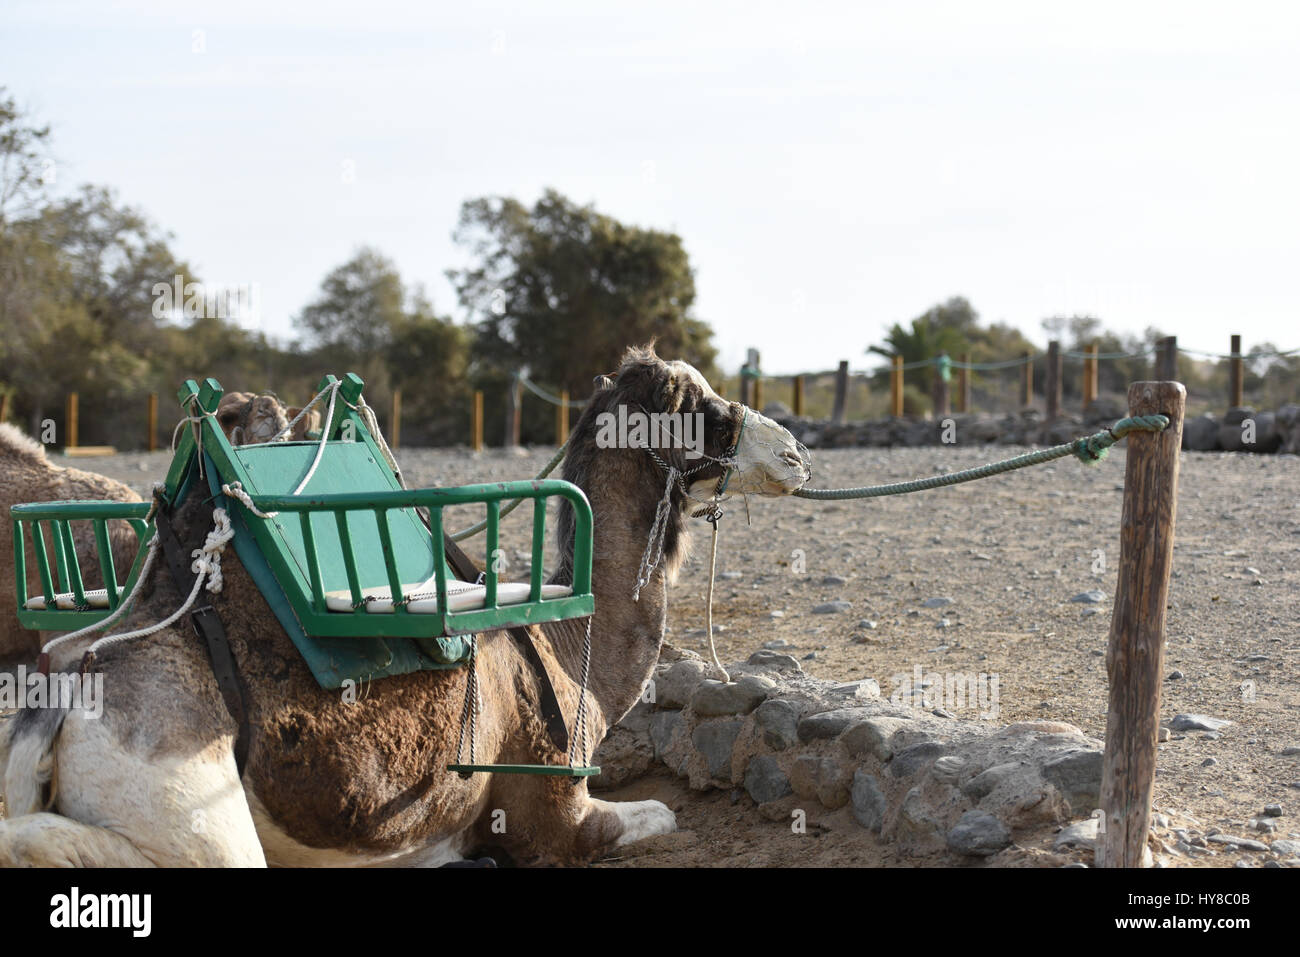 Camel with a seats fixed to him Stock Photo